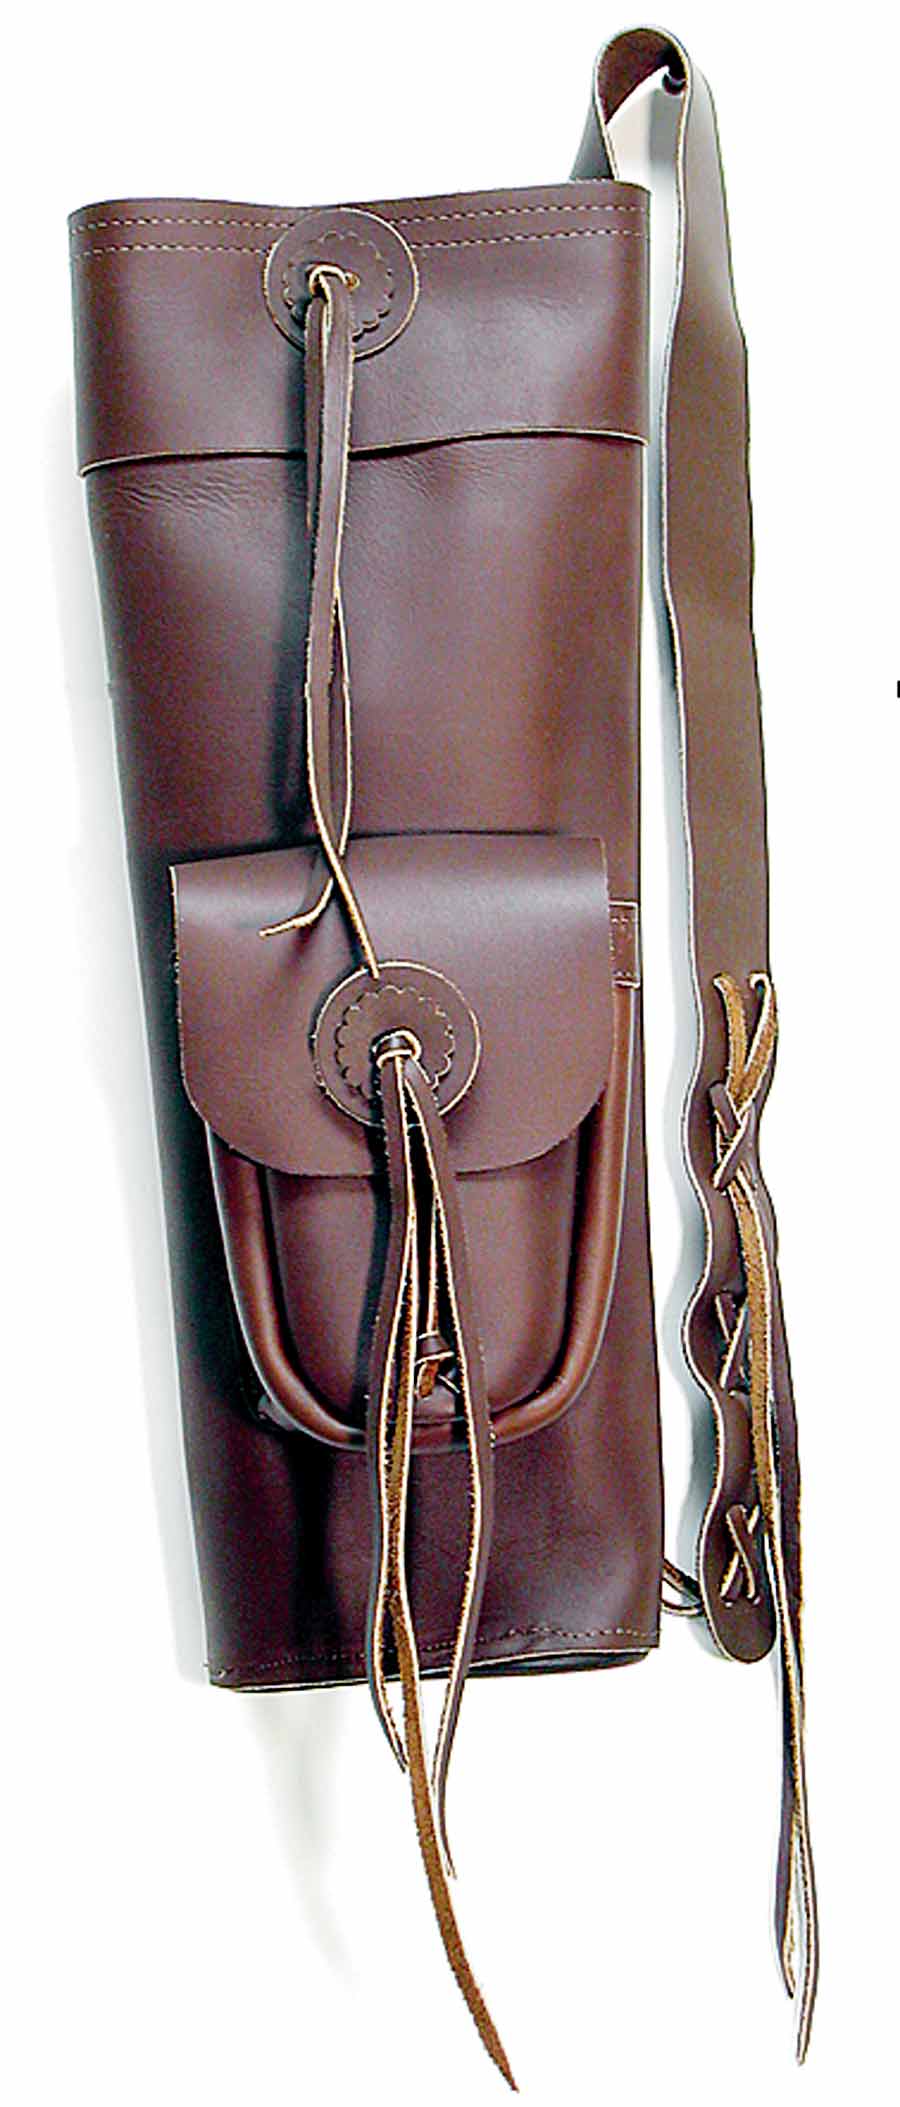 Martin Flint Traditional Back Quiver 20in large image. Click to return to Martin Flint Traditional Back Quiver 20in price and description